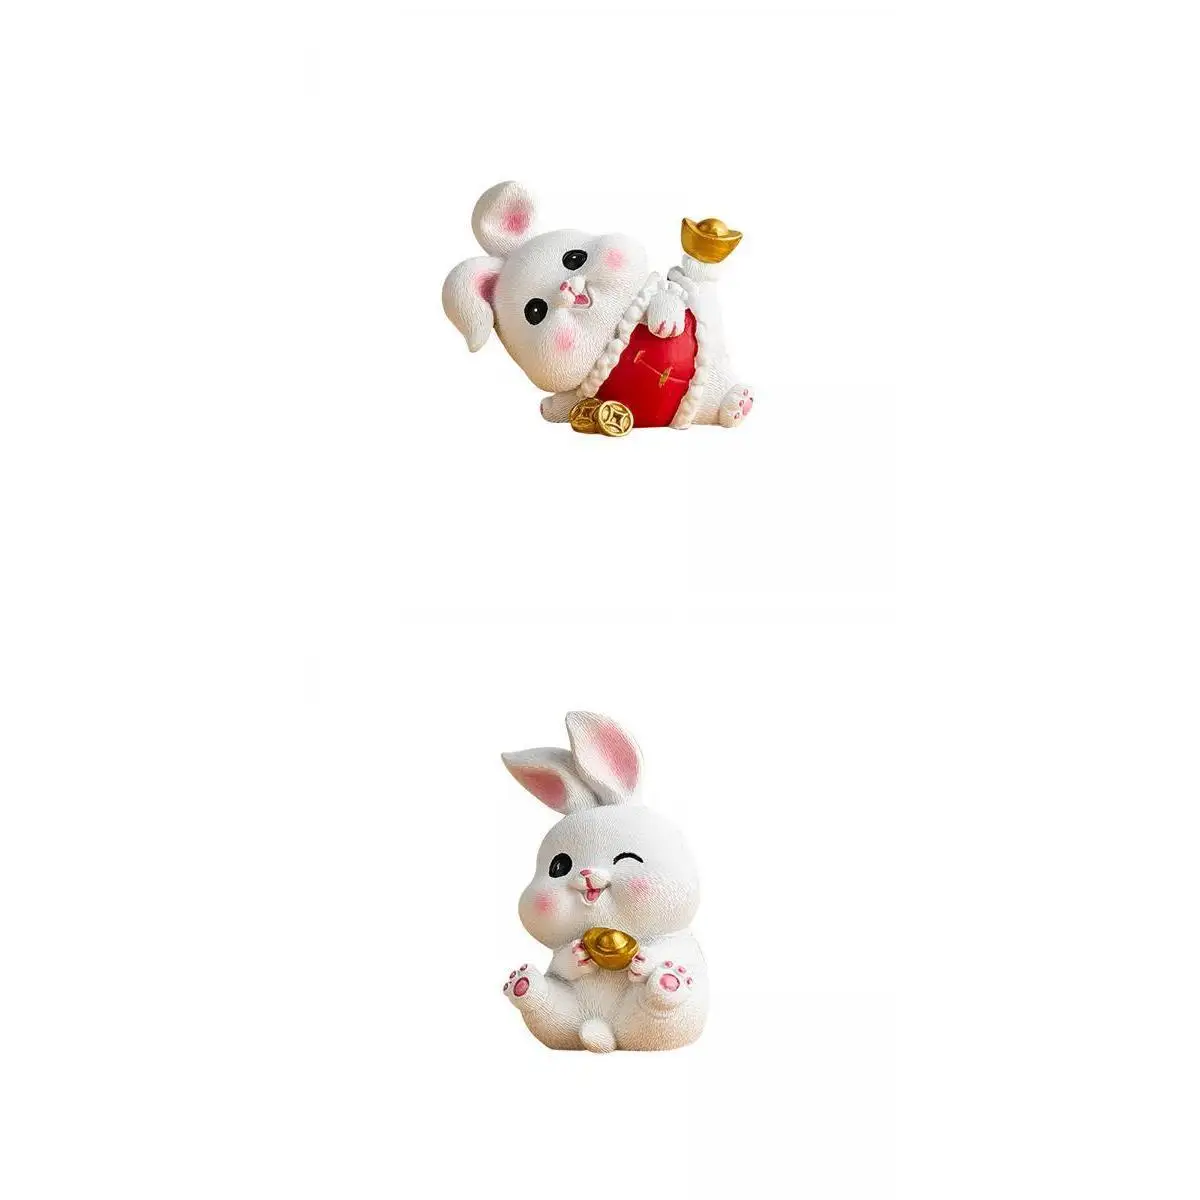 Chinese New Year Rabbit Statue Miniature Crafts Desktop Ornament for Bedroom